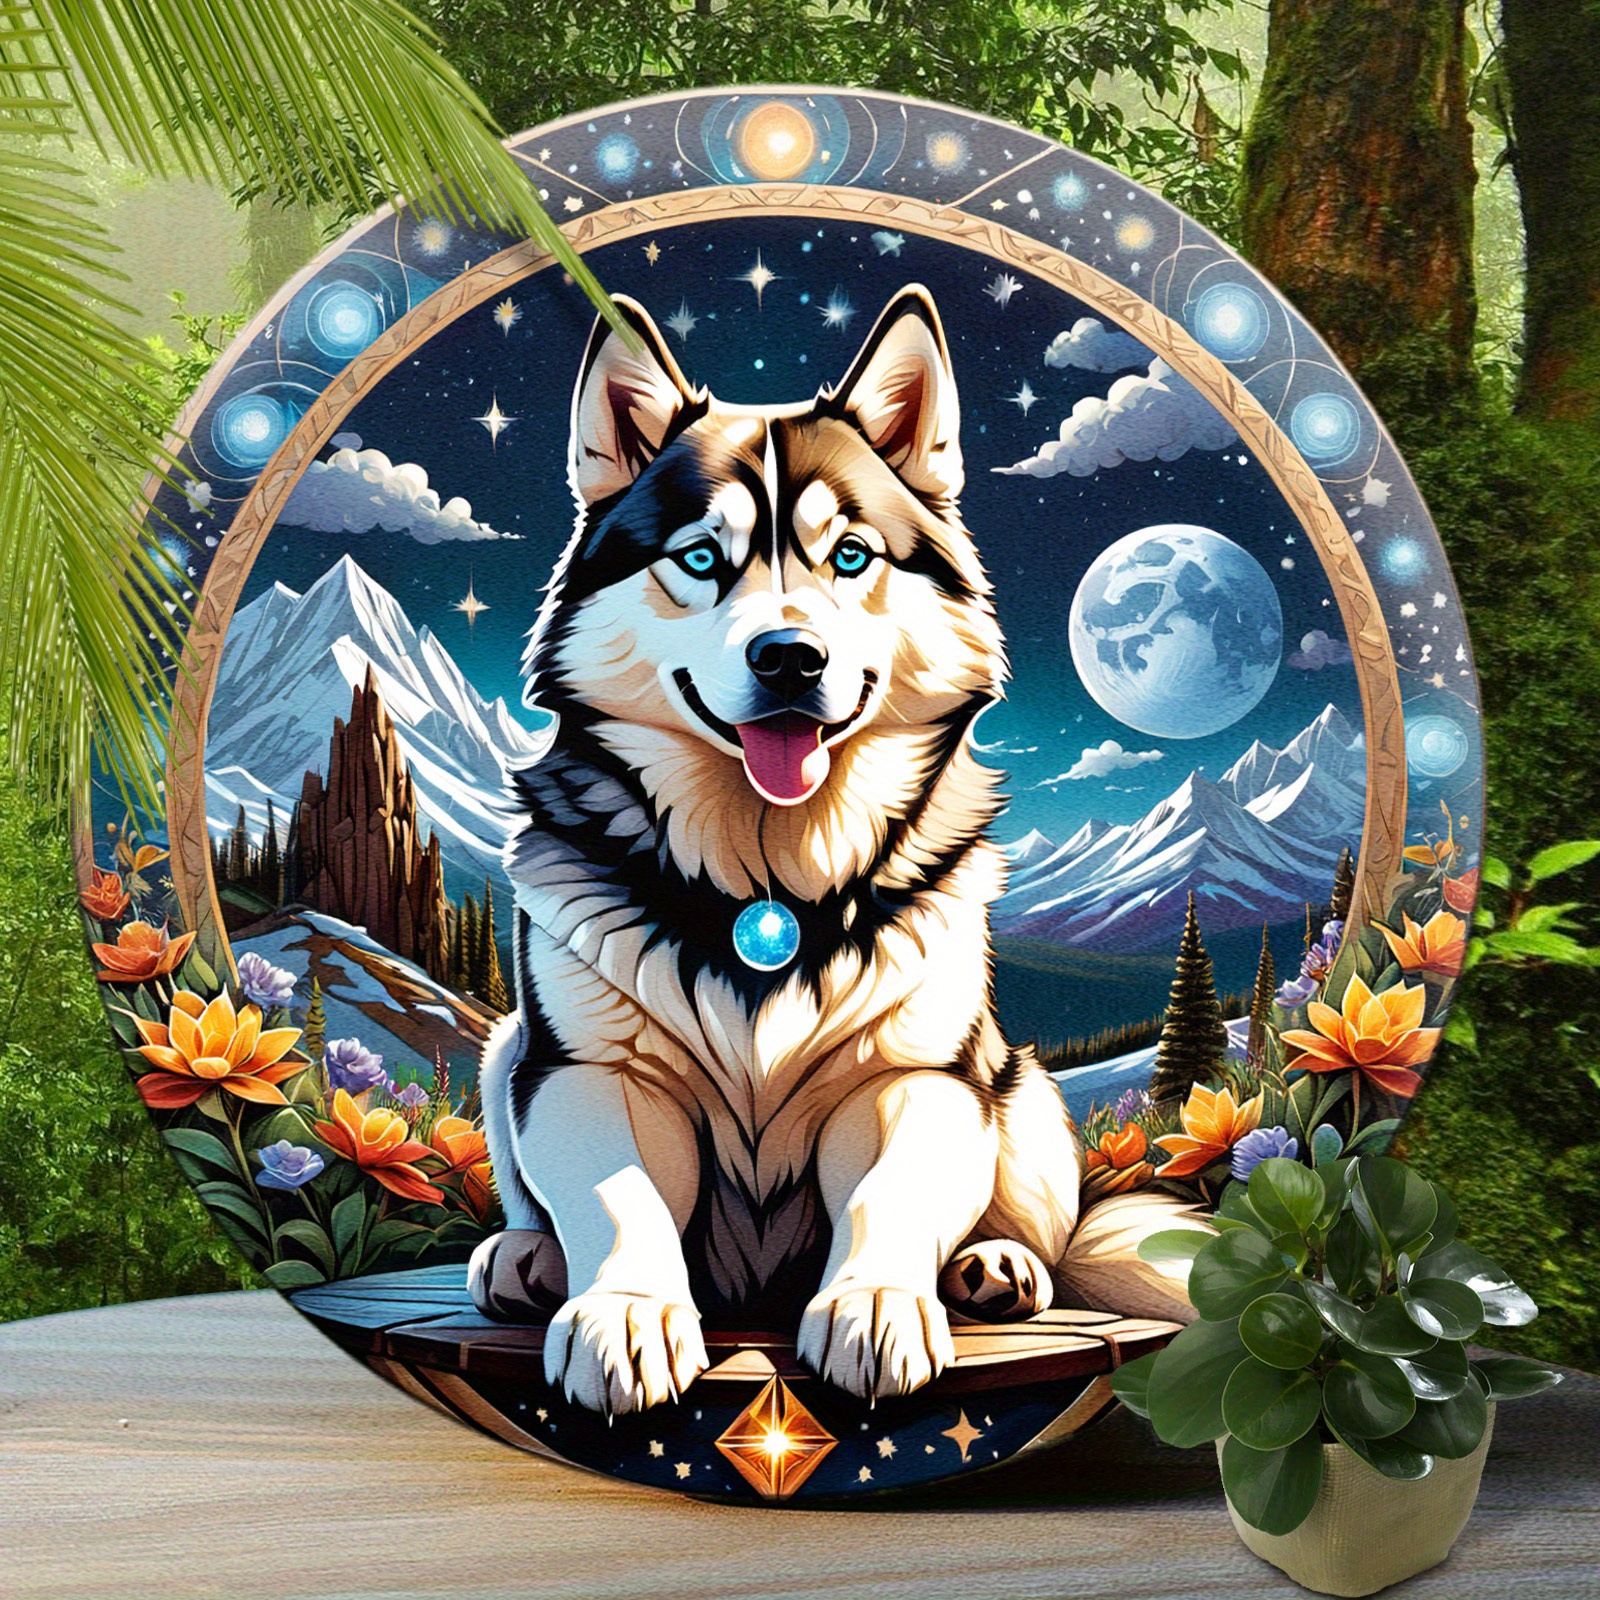 

1pc, Husky Sign - Cute Dog Aluminum Sign, Suitable For Home Room Cafe Bedroom Bar Living Room Garage Wall Decoration, Round Fashion Art Aesthetic, Holiday Gift 8x8 Inch (20x20cm)